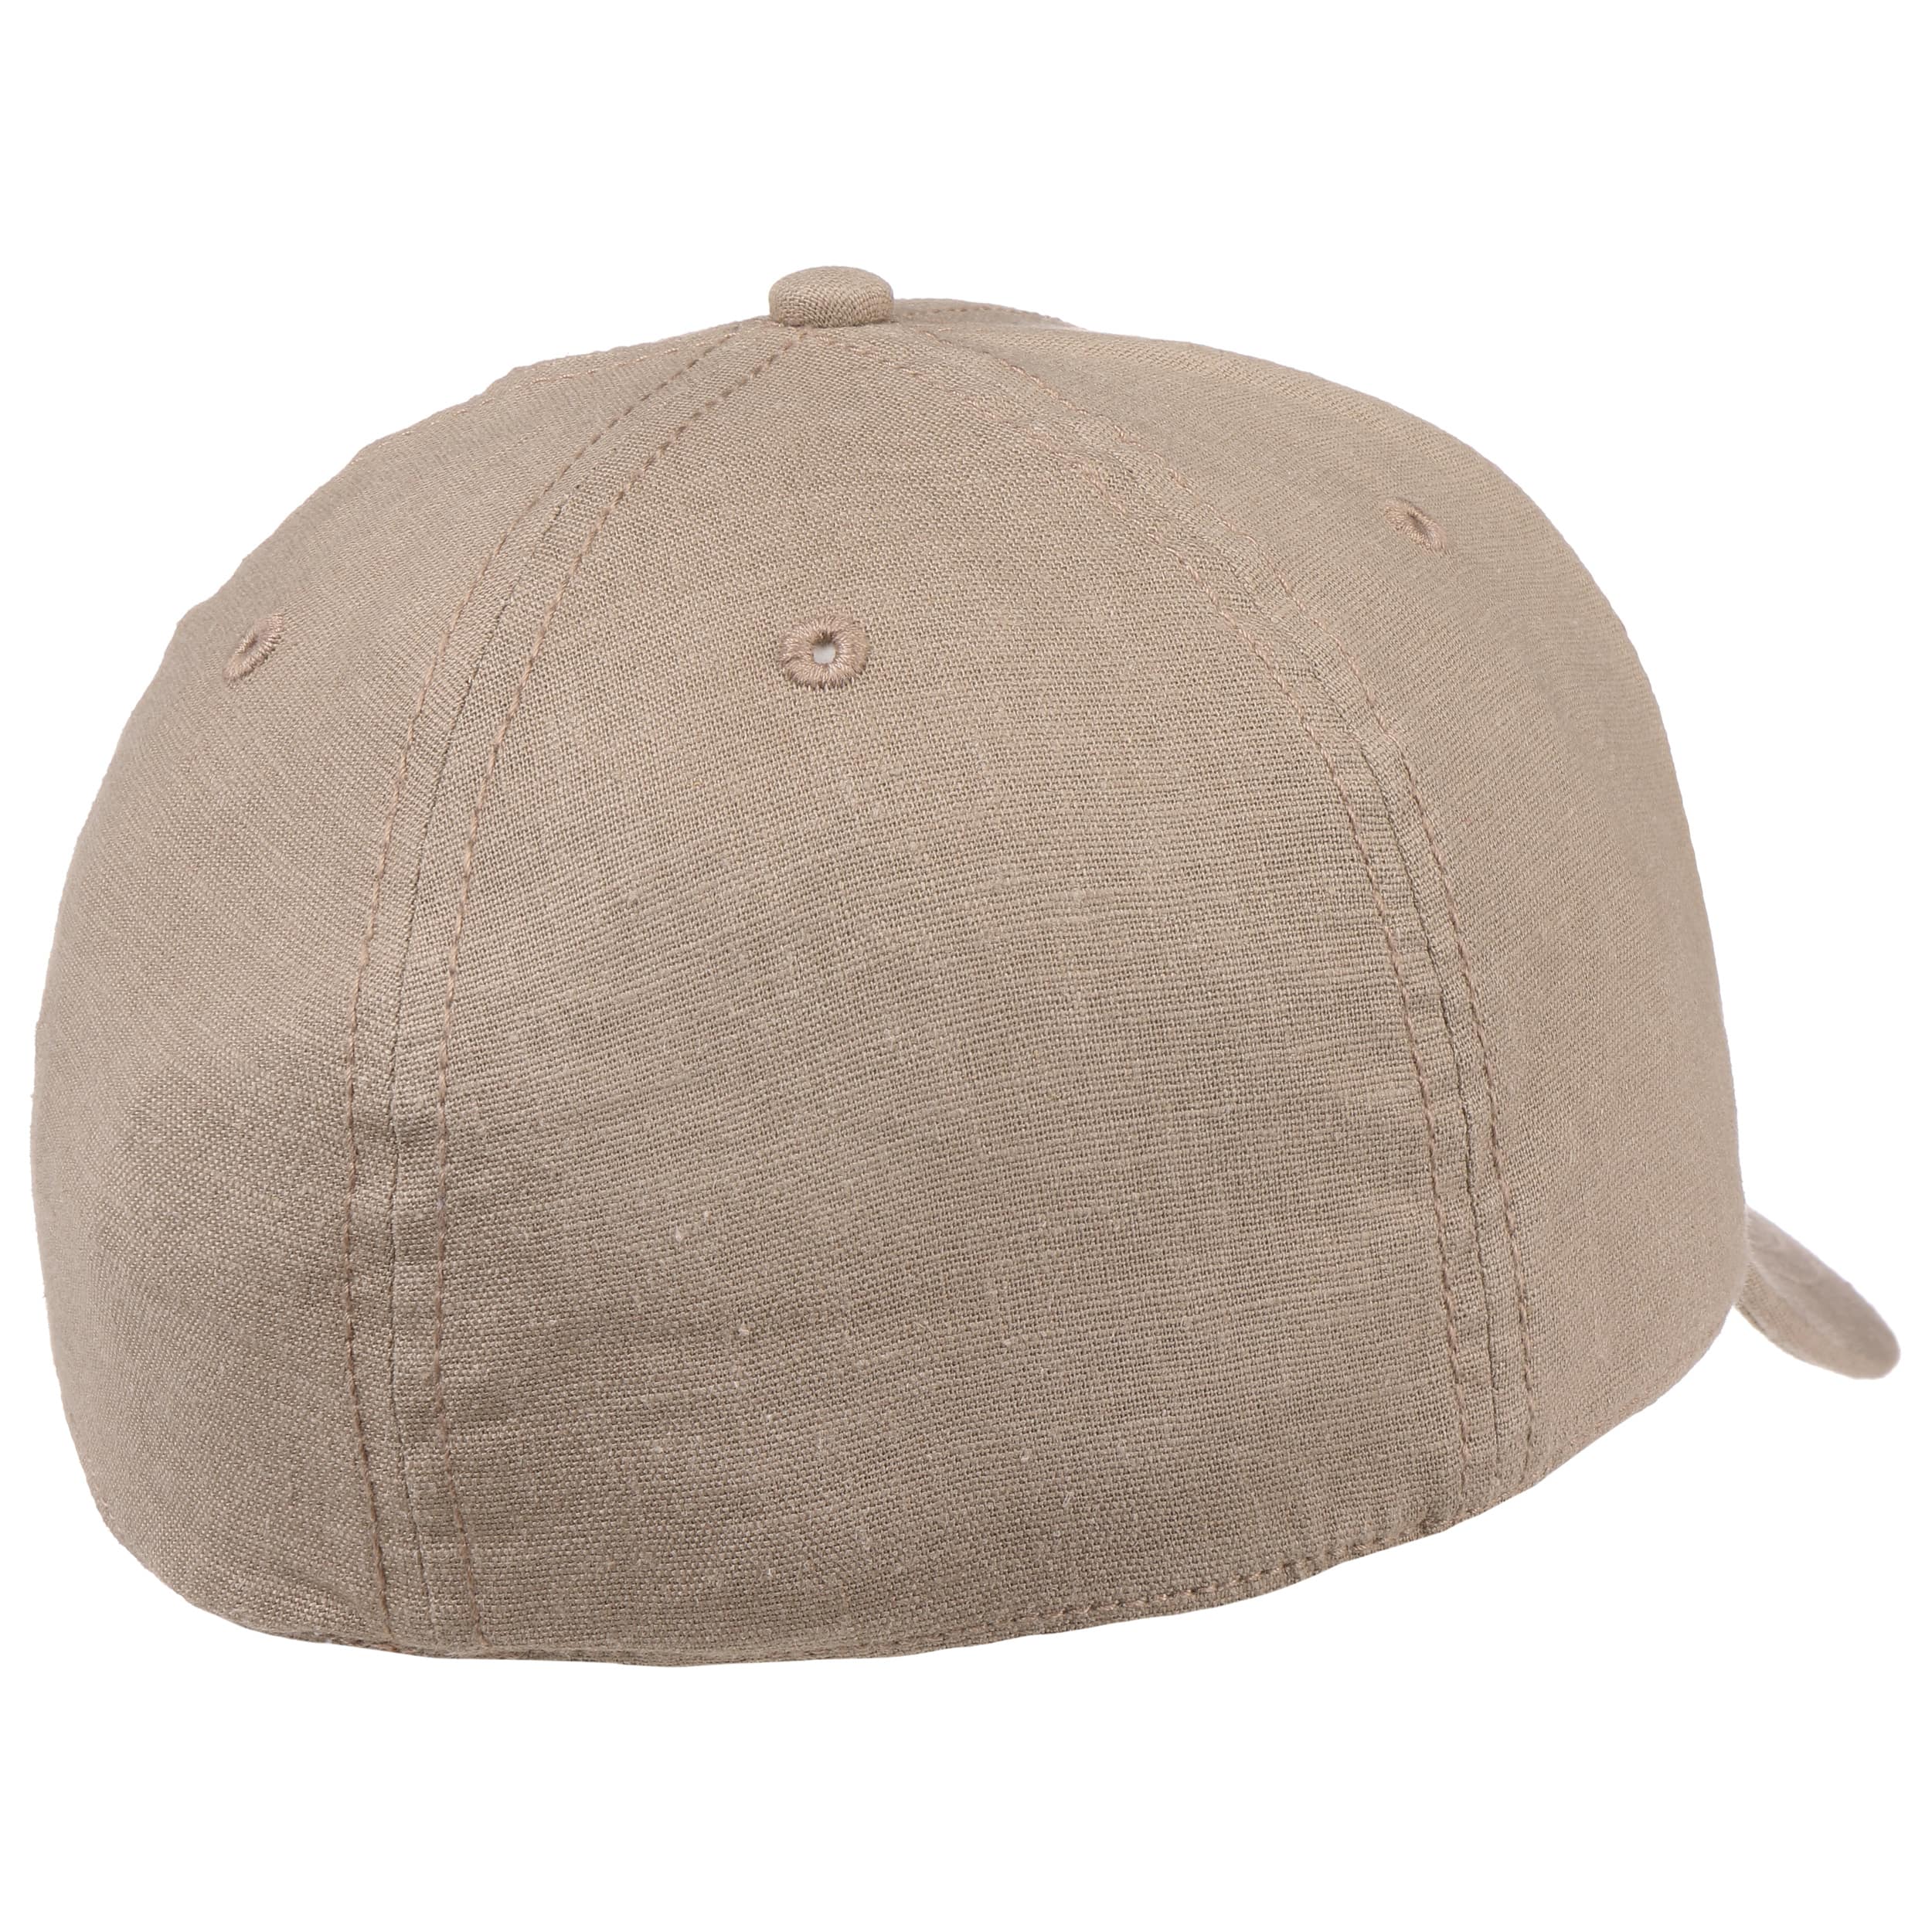 26,95 € Sao Cap Linen Paolo by Chillouts -